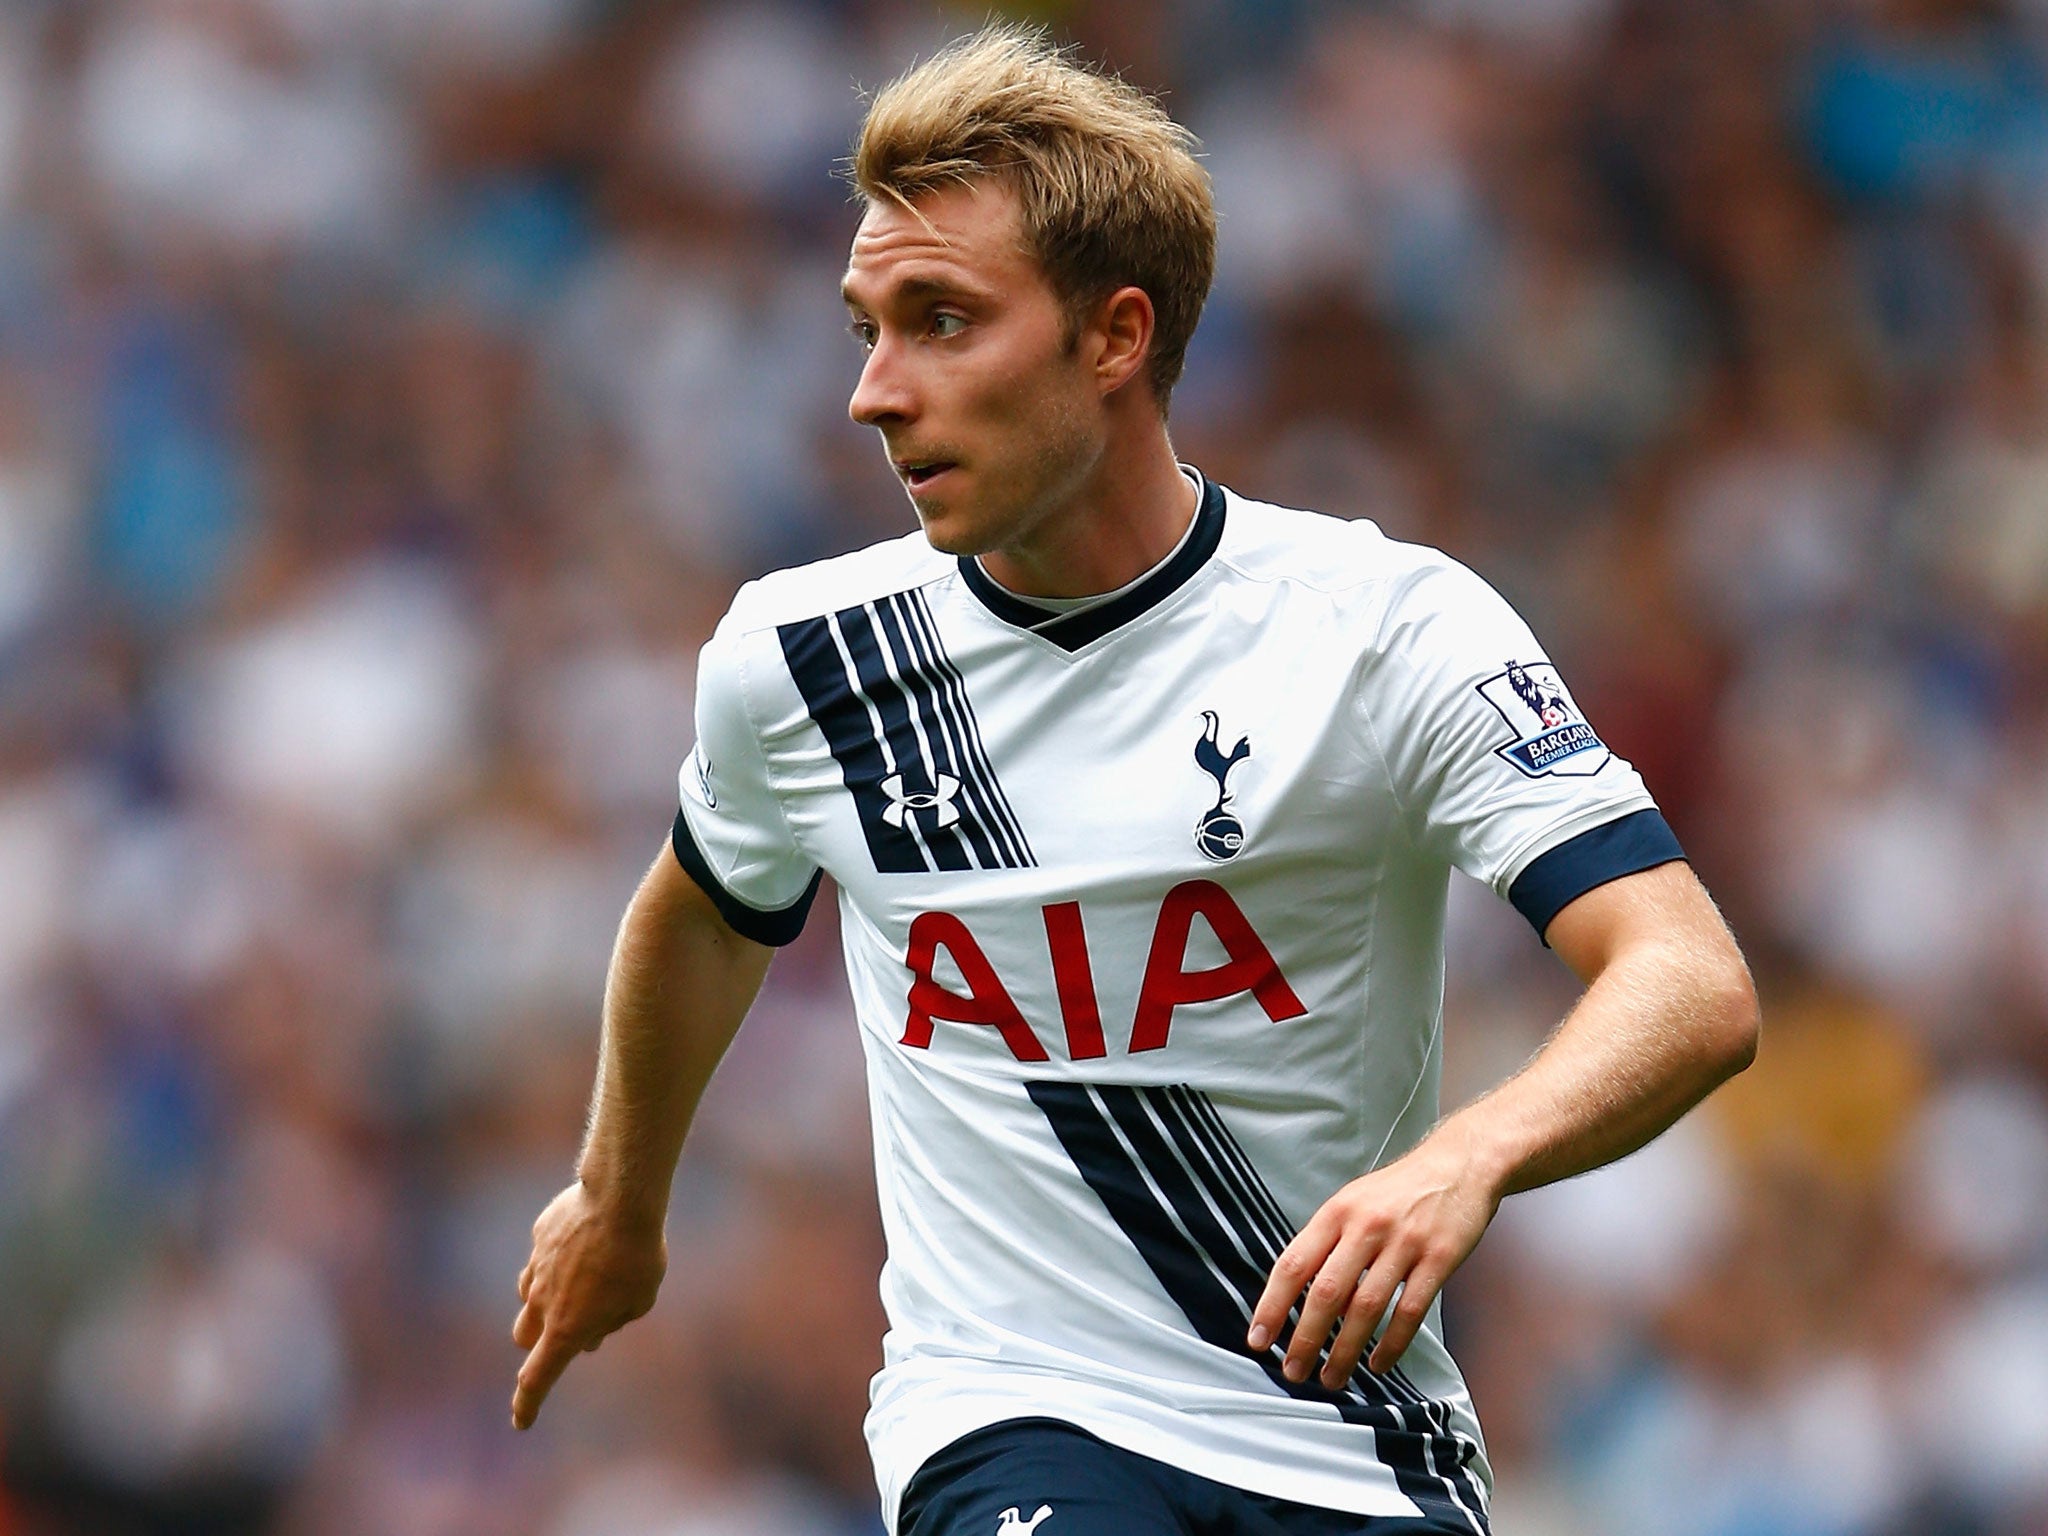 Tottenham are determined to hold on to Christian Eriksen